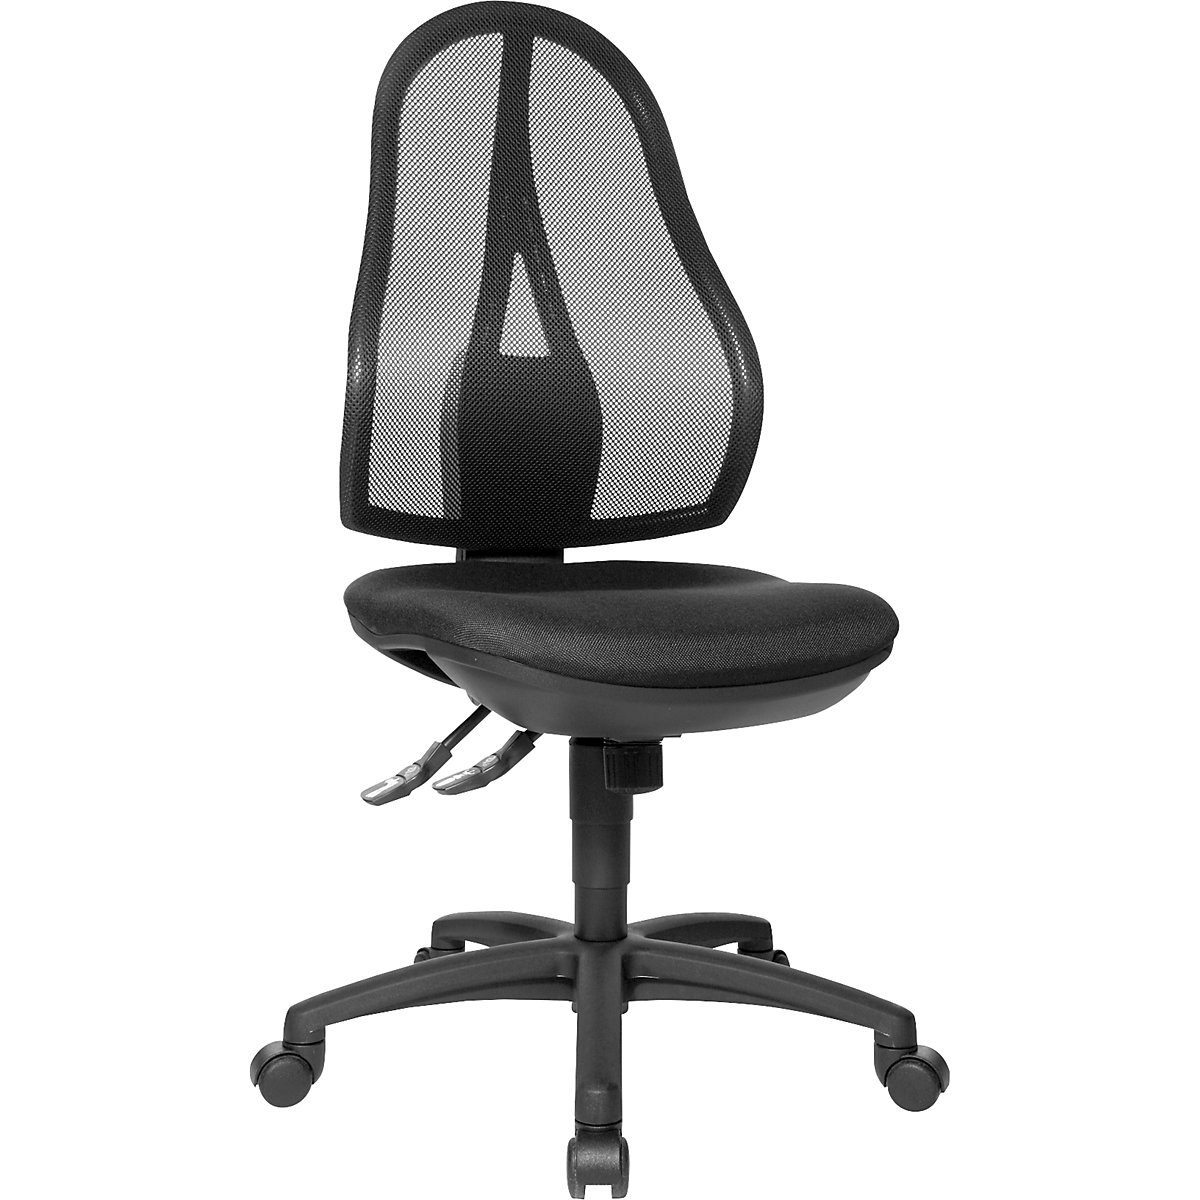 OPEN POINT SY office swivel chair – Topstar, without armrests, mesh back rest in black, black covering-5